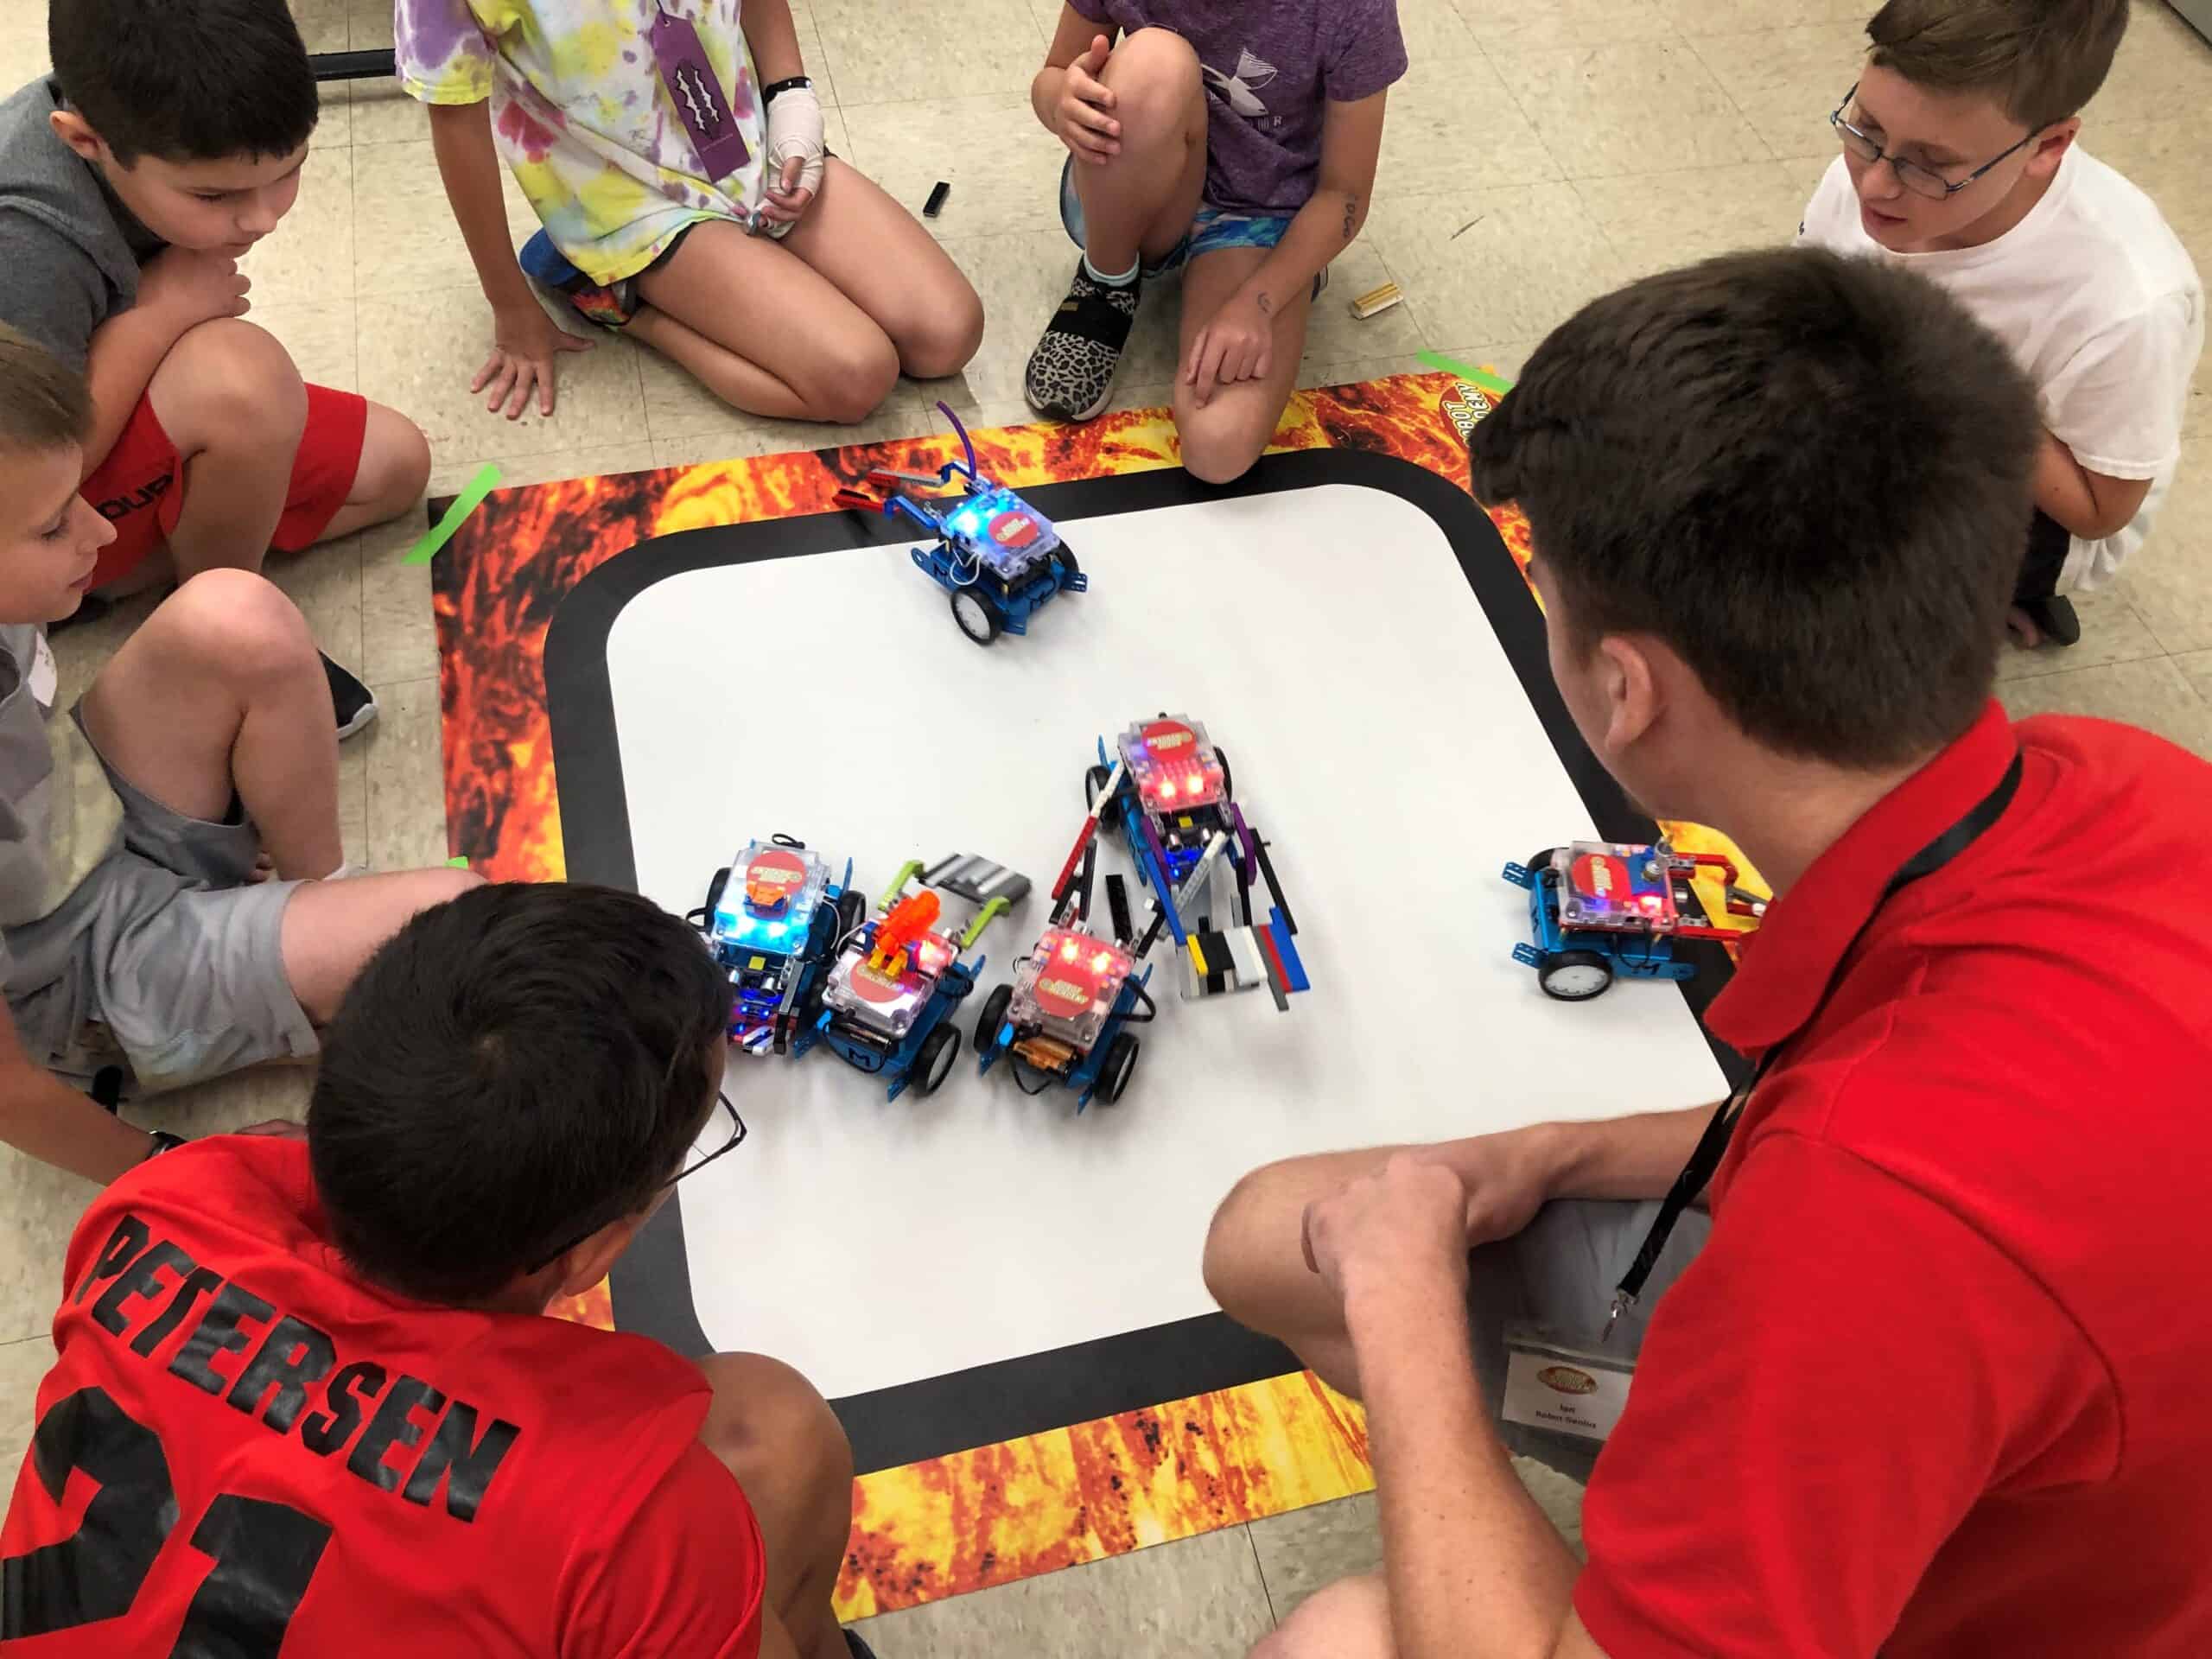 You are currently viewing LEGO Robot Afterschool Class for 1st to 5th Grades | 9/15/22 to 11/17/22 | Tremont Elementary (Please put dismissal in comment section: SACC, Pick Up or Walk)